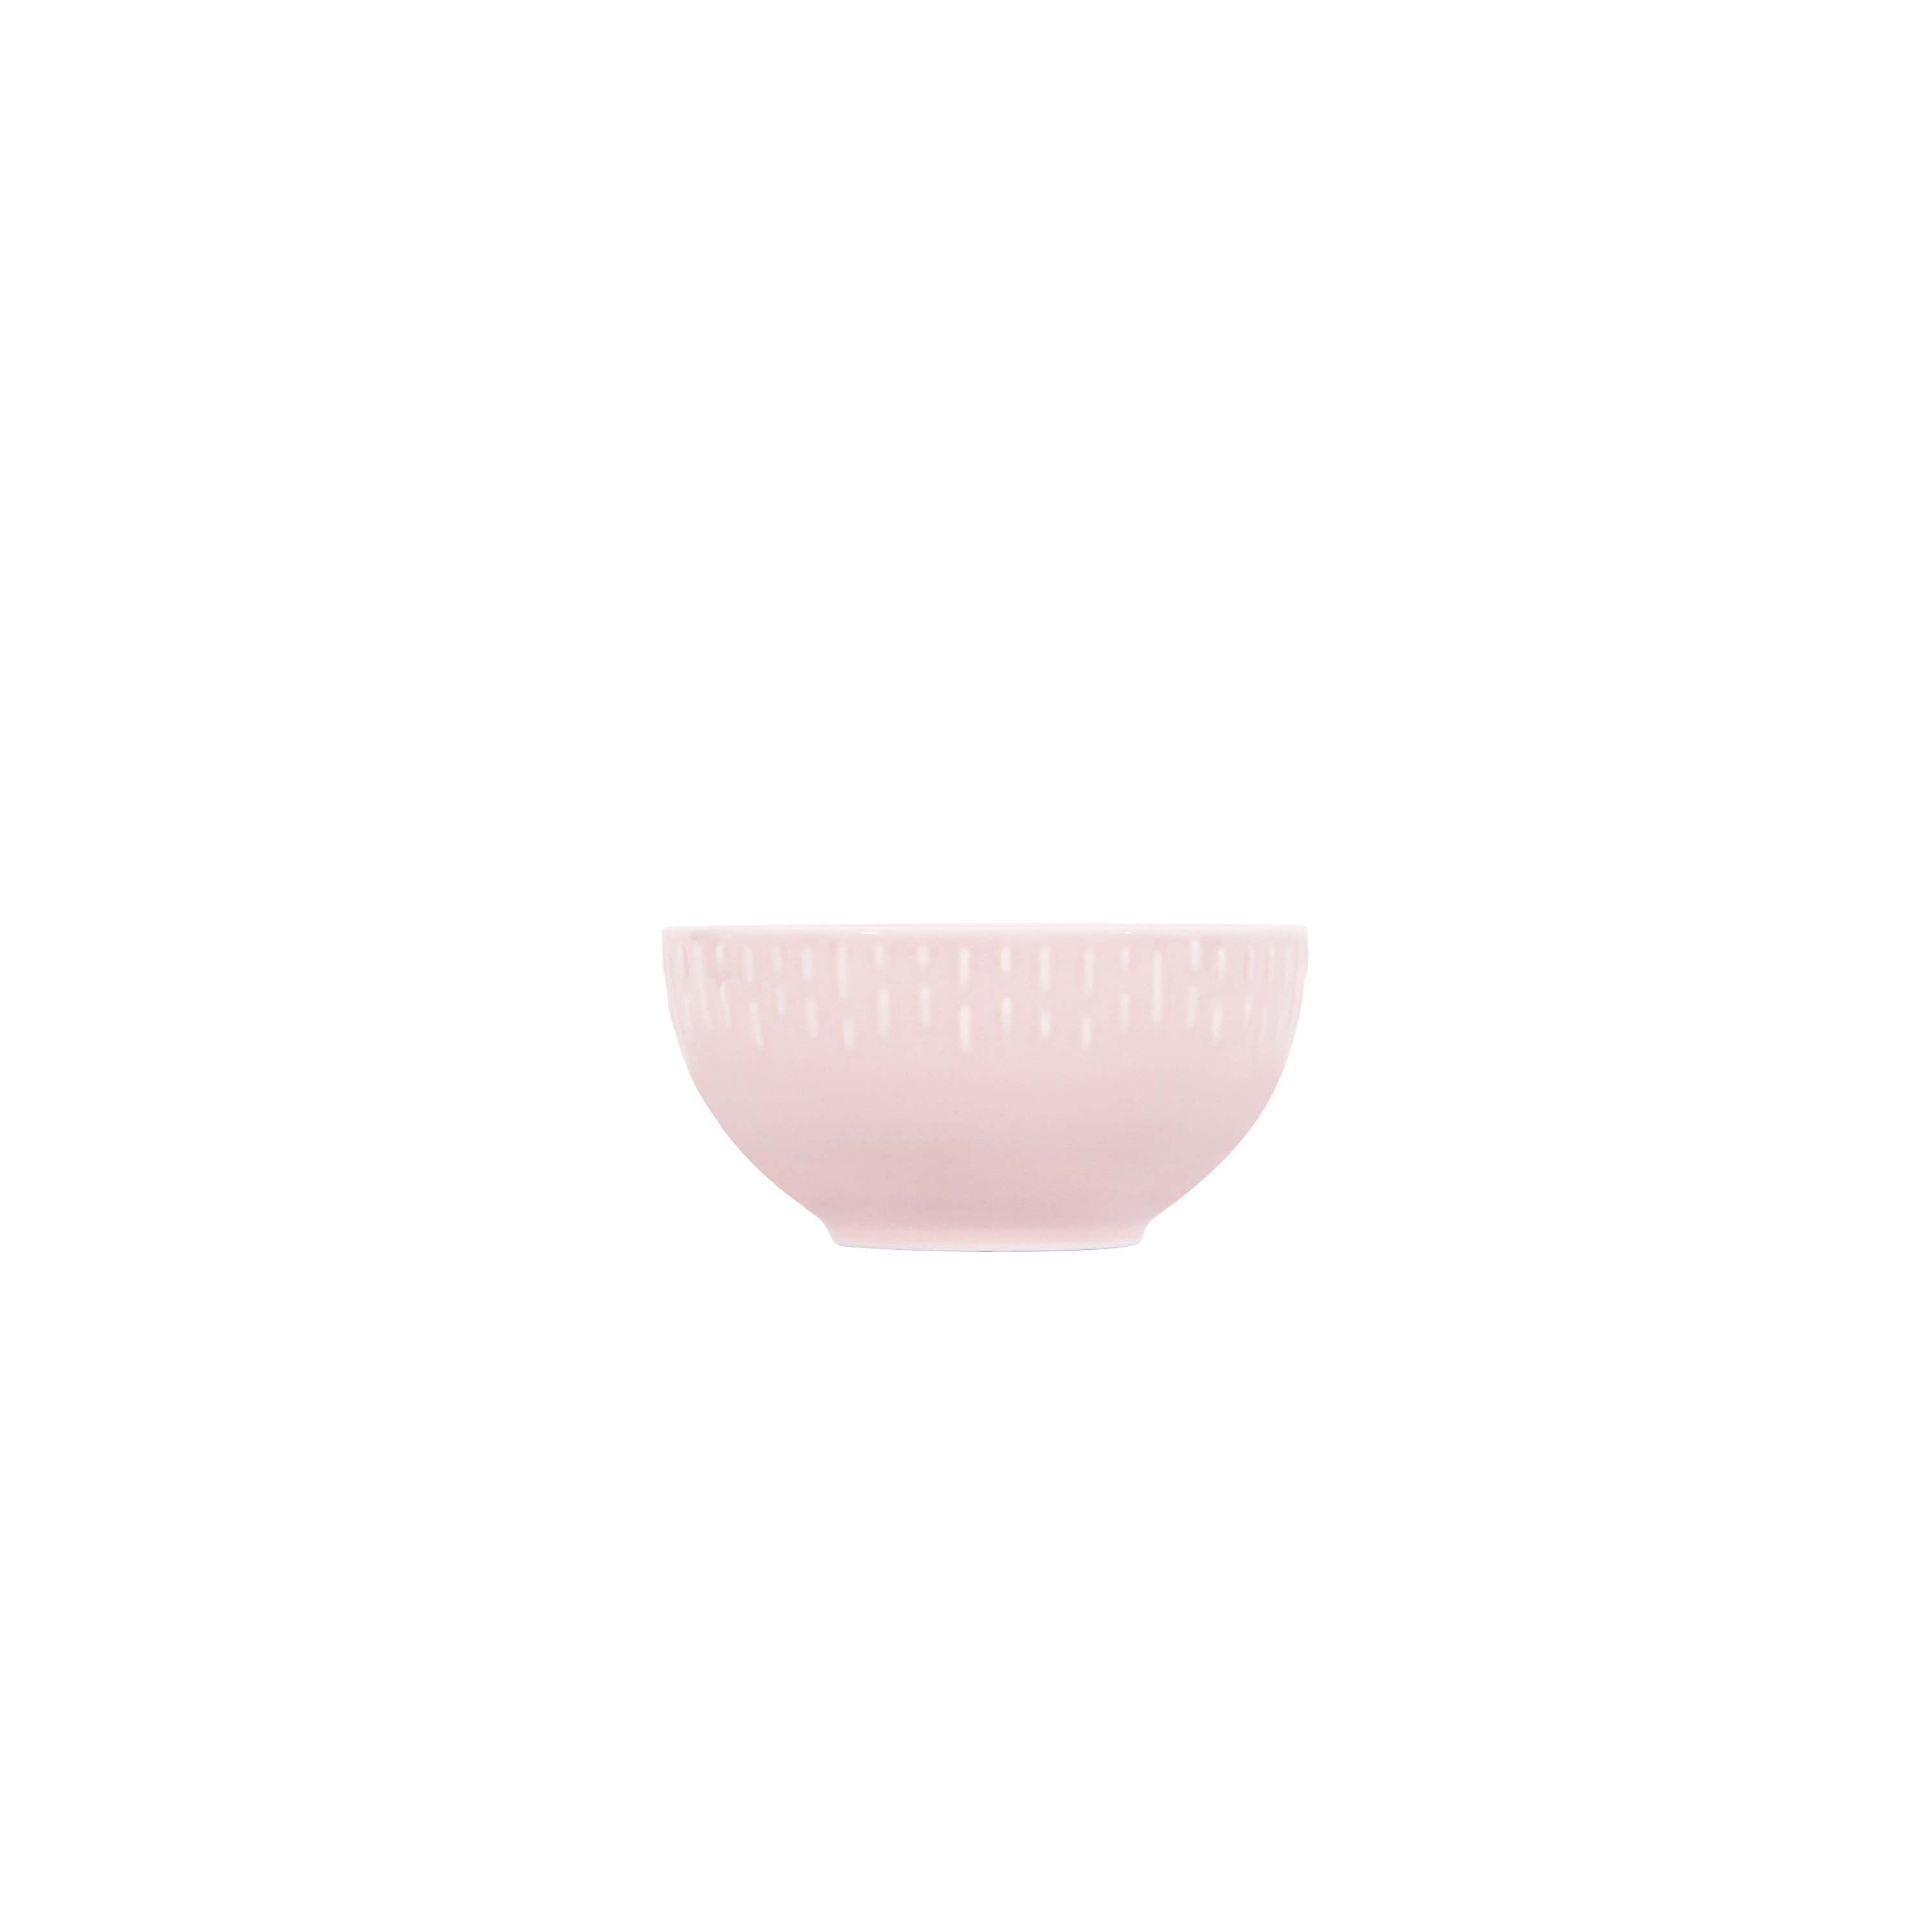 Aida - Life in Colour - Confetti - Candy floss bowl w/relief porcelain (13347)